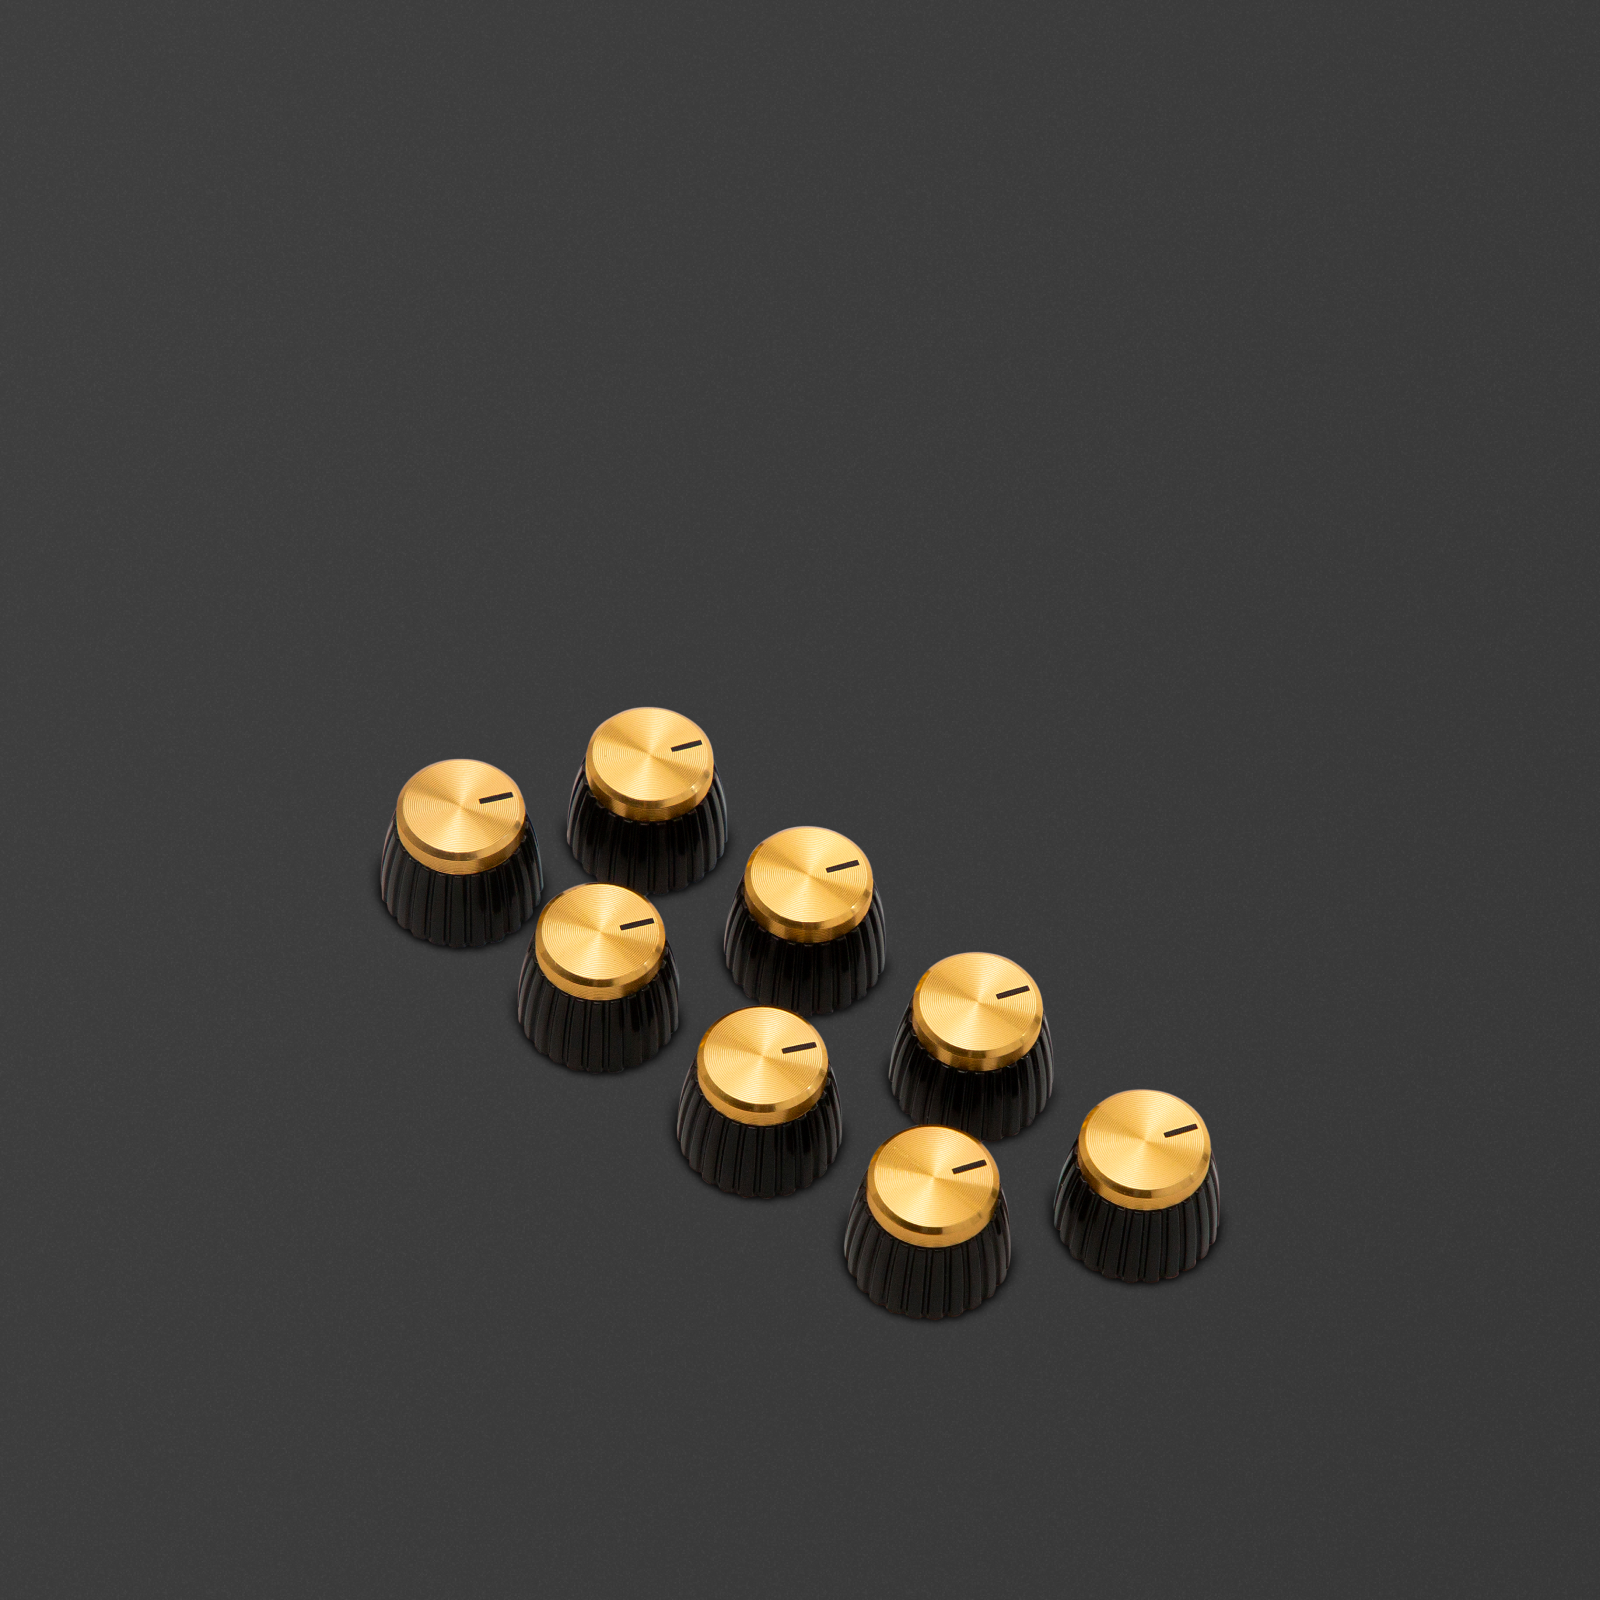 Knobs with a brown body and gold cap.